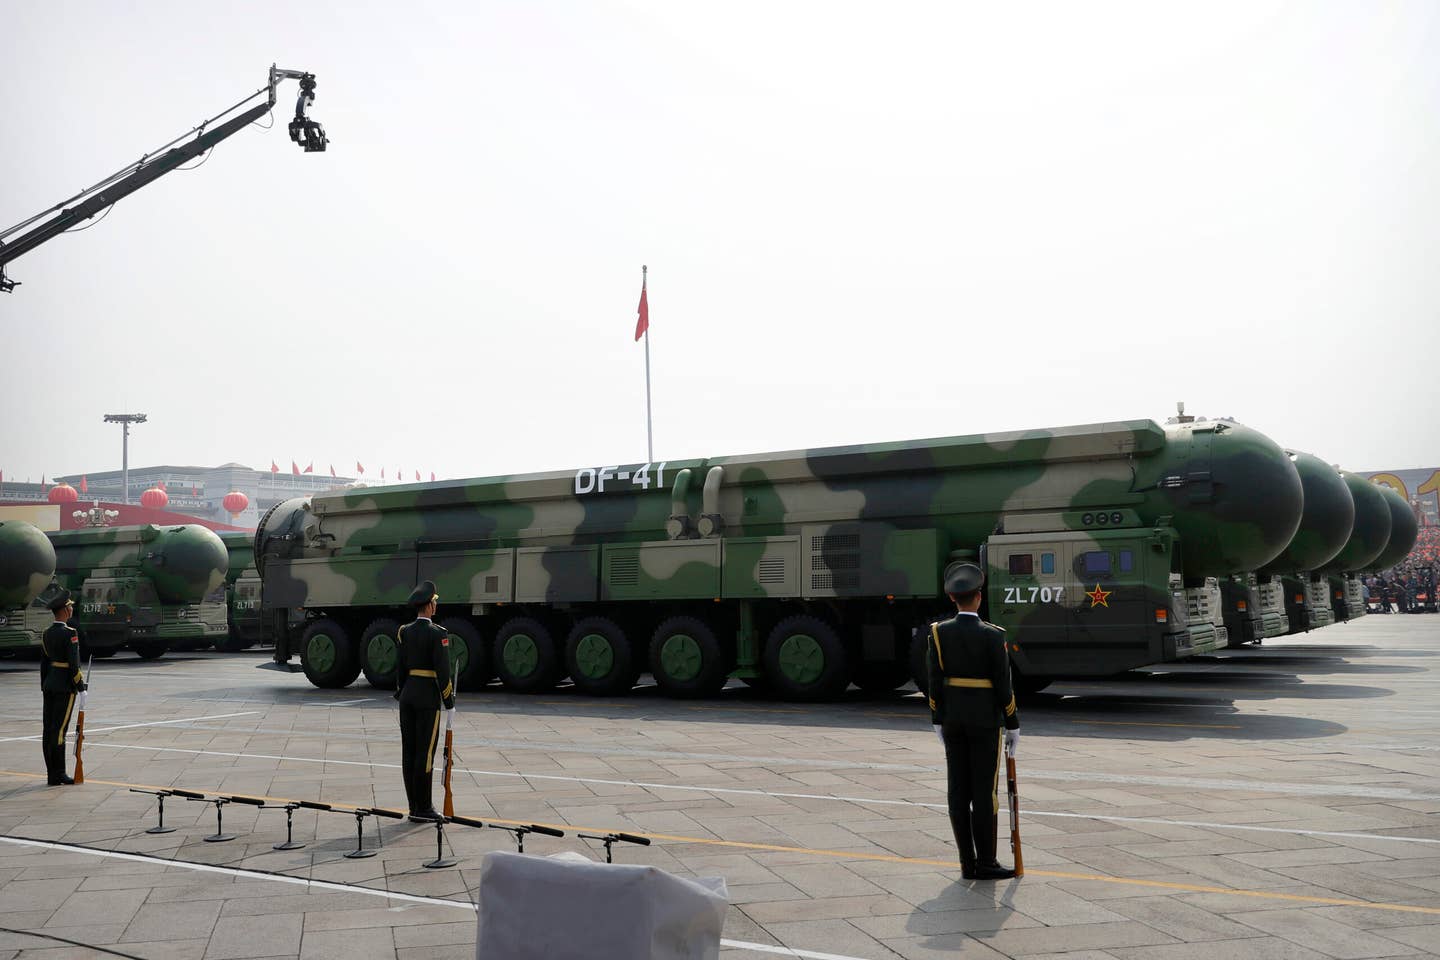 Chinese military vehicles carrying DF-41 ICBMs roll during a parade to commemorate the 70th anniversary of the founding of Communist China in Beijing, Tuesday, Oct. 1, 2019. <em>Credit: AP Photo/Mark Schiefelbein</em>